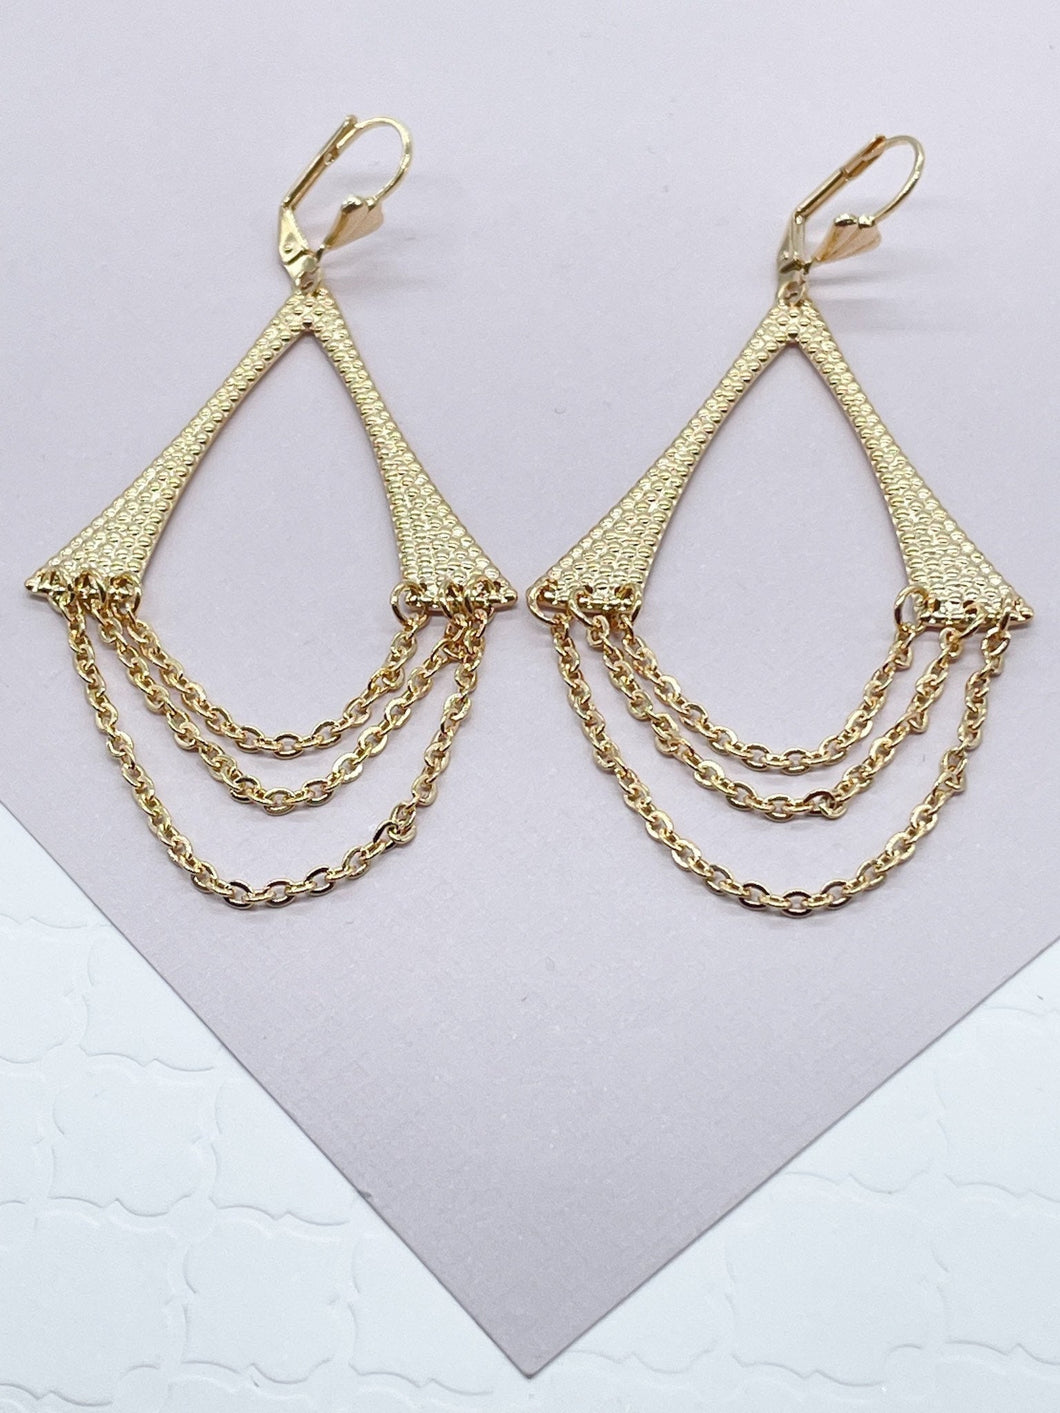 18k Gold Filled Light Chandelier Dangling Earrings Featuring 3 Cable Chain And Texture Wishbone Like Style Protection